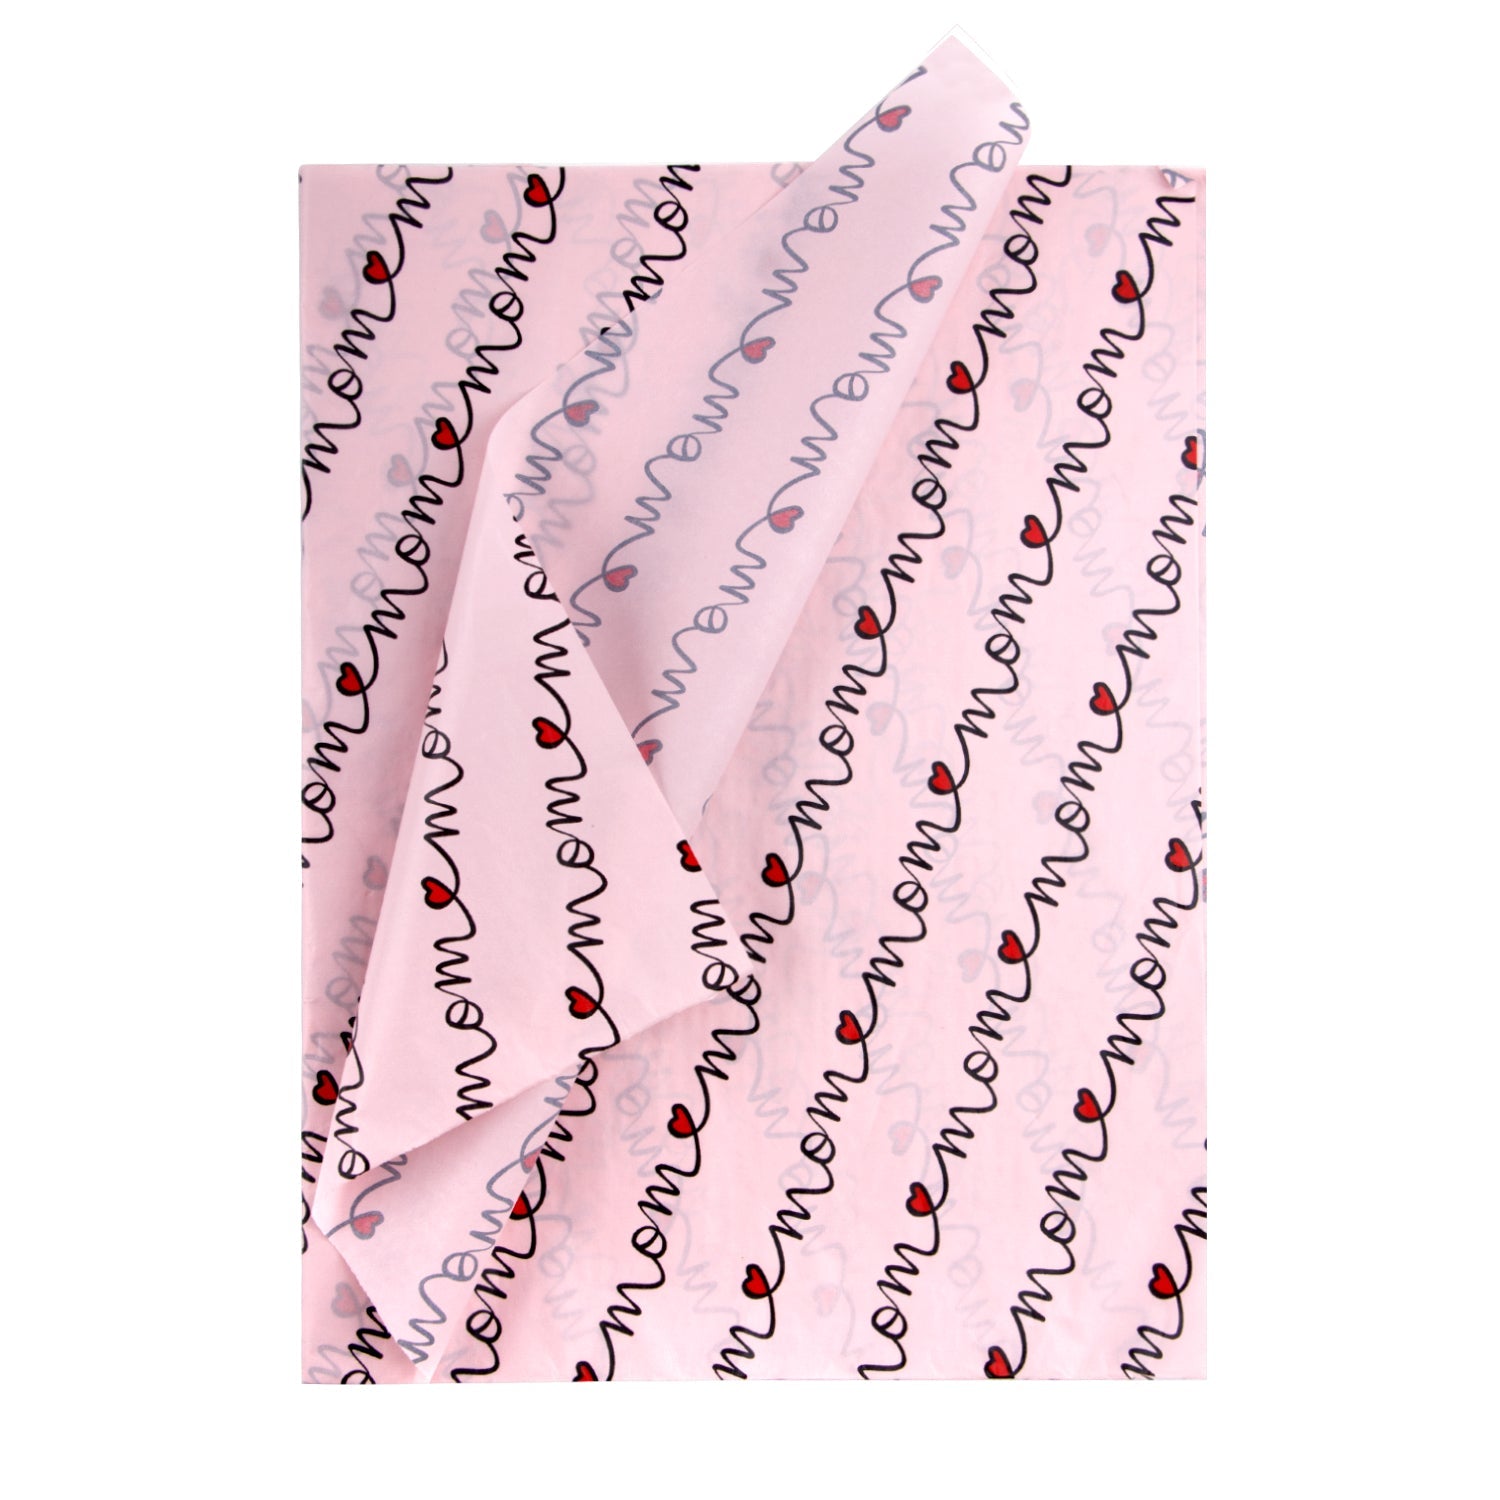 Gift Wrapping Tissue Paper- 24 Sheets - 19.7" x 27.5" Mom Design